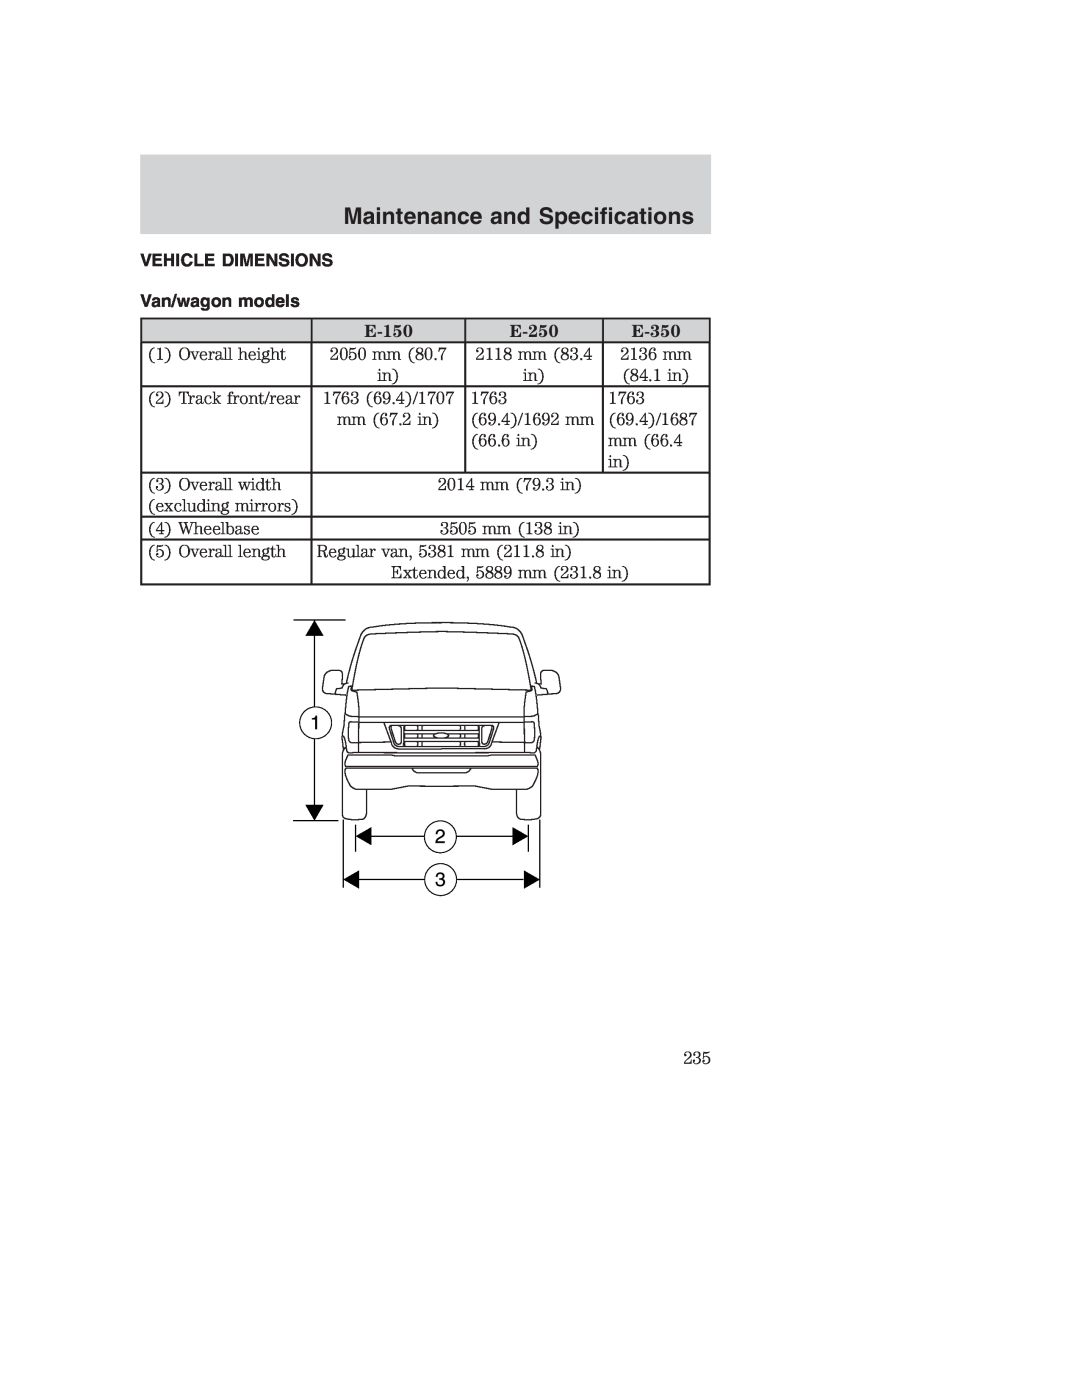 Ford AM/FM stereo manual VEHICLE DIMENSIONS Van/wagon models, E-150, E-250, E-350, Maintenance and Specifications 